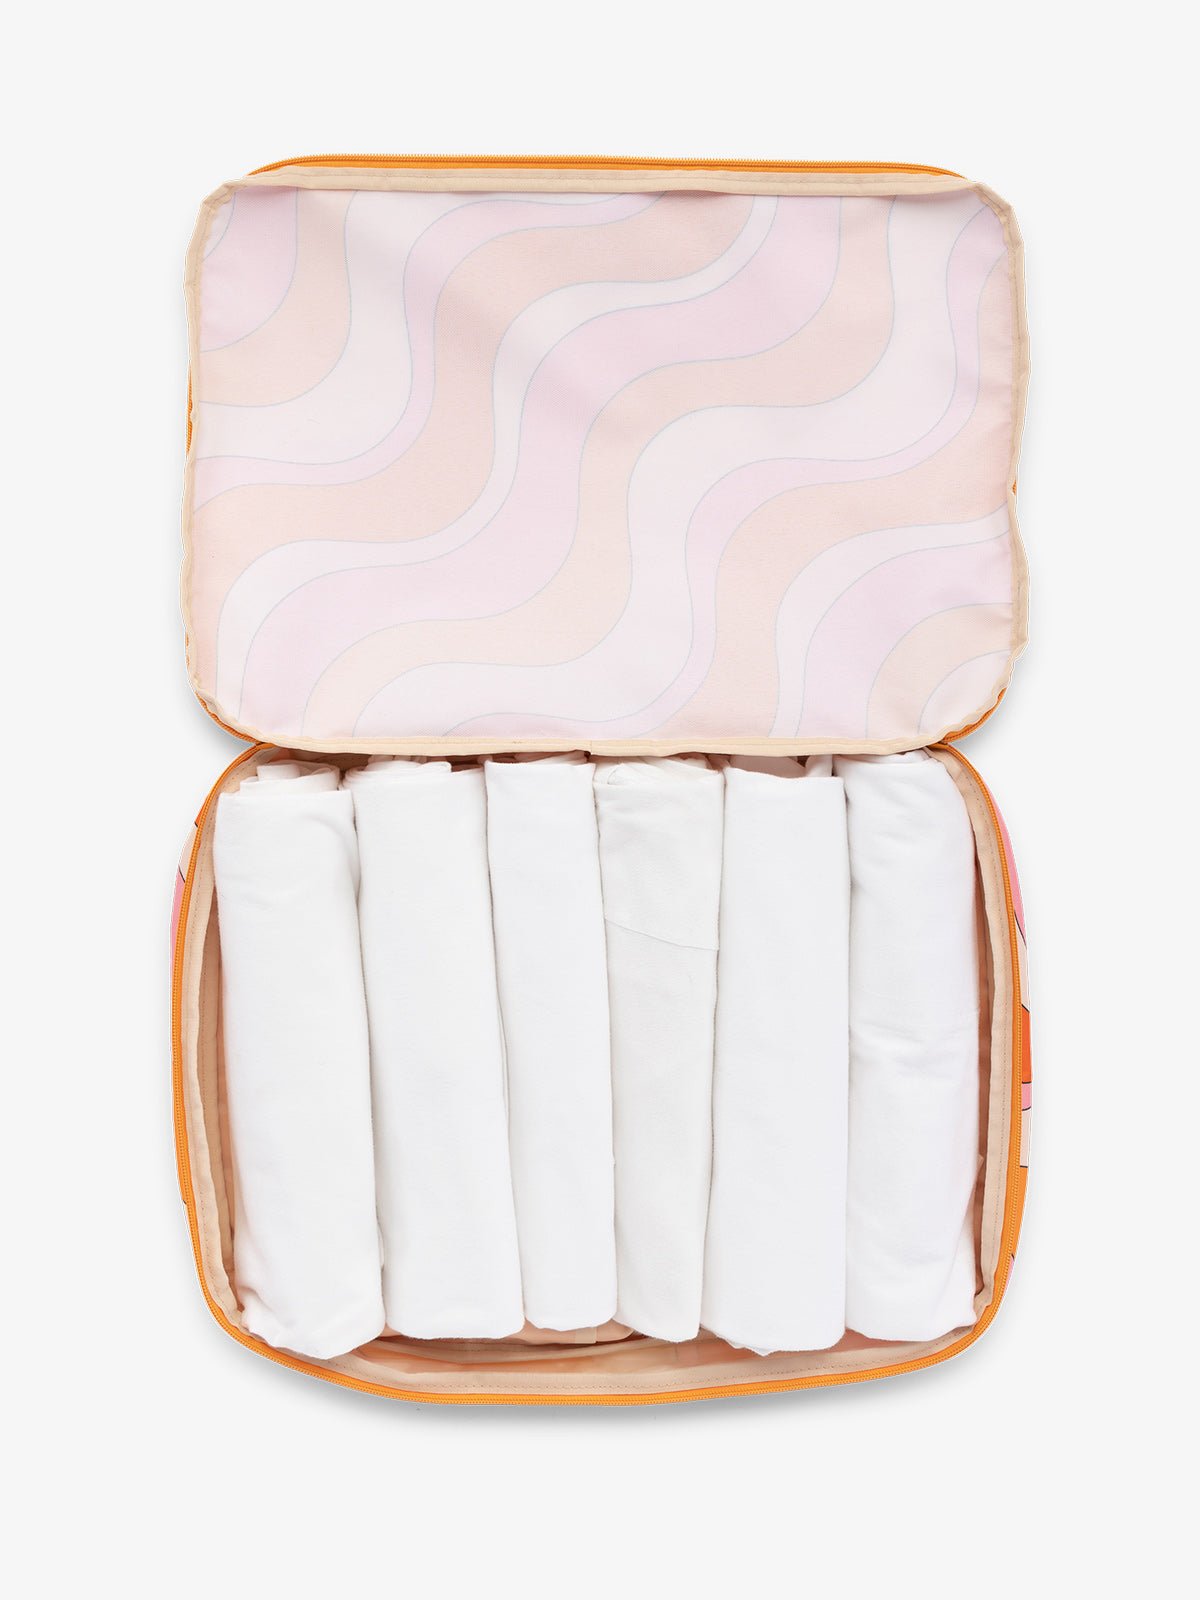 CALPAK Large Compression Packing cubes for travel made with durable materials in retro pink and orange wavy print